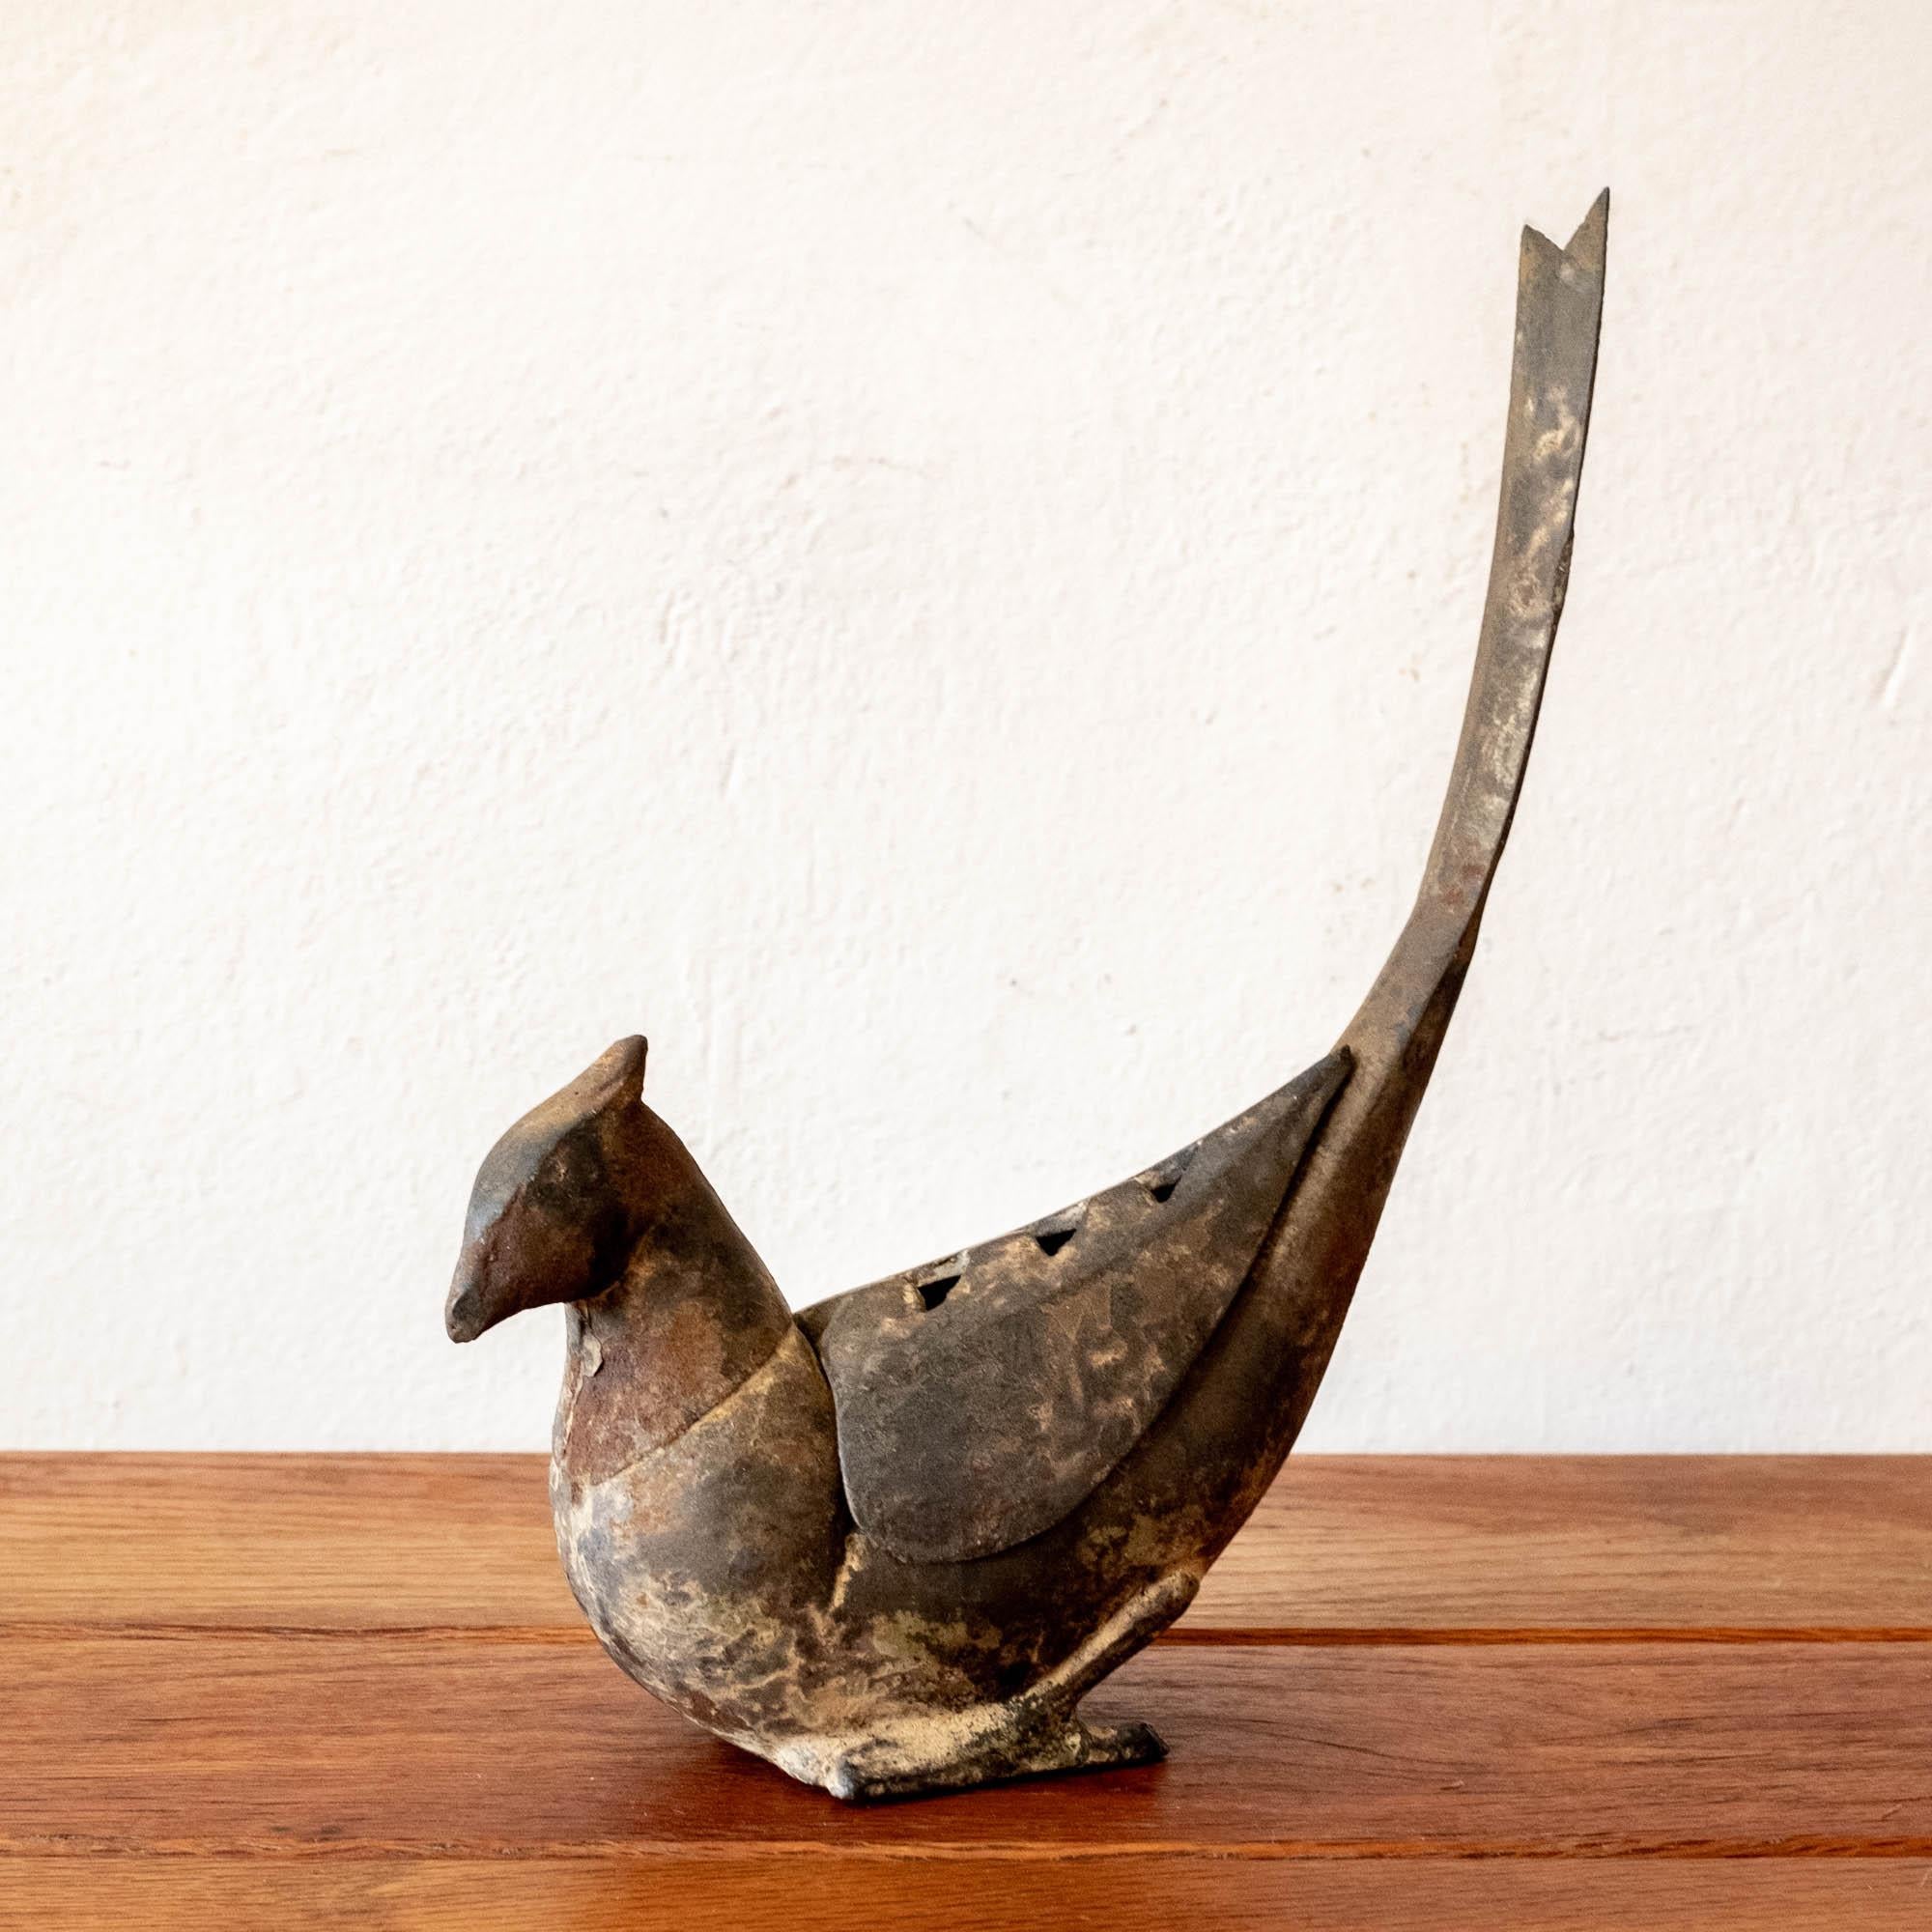 Iron bird sculpture with a nice patina. Removable vented piece, perhaps for burning incense or flower arrangements, 1950s. Iron bird sculpture with a nice patina. Removable vented piece, perhaps for burning incense or flower arrangements, 1950s.